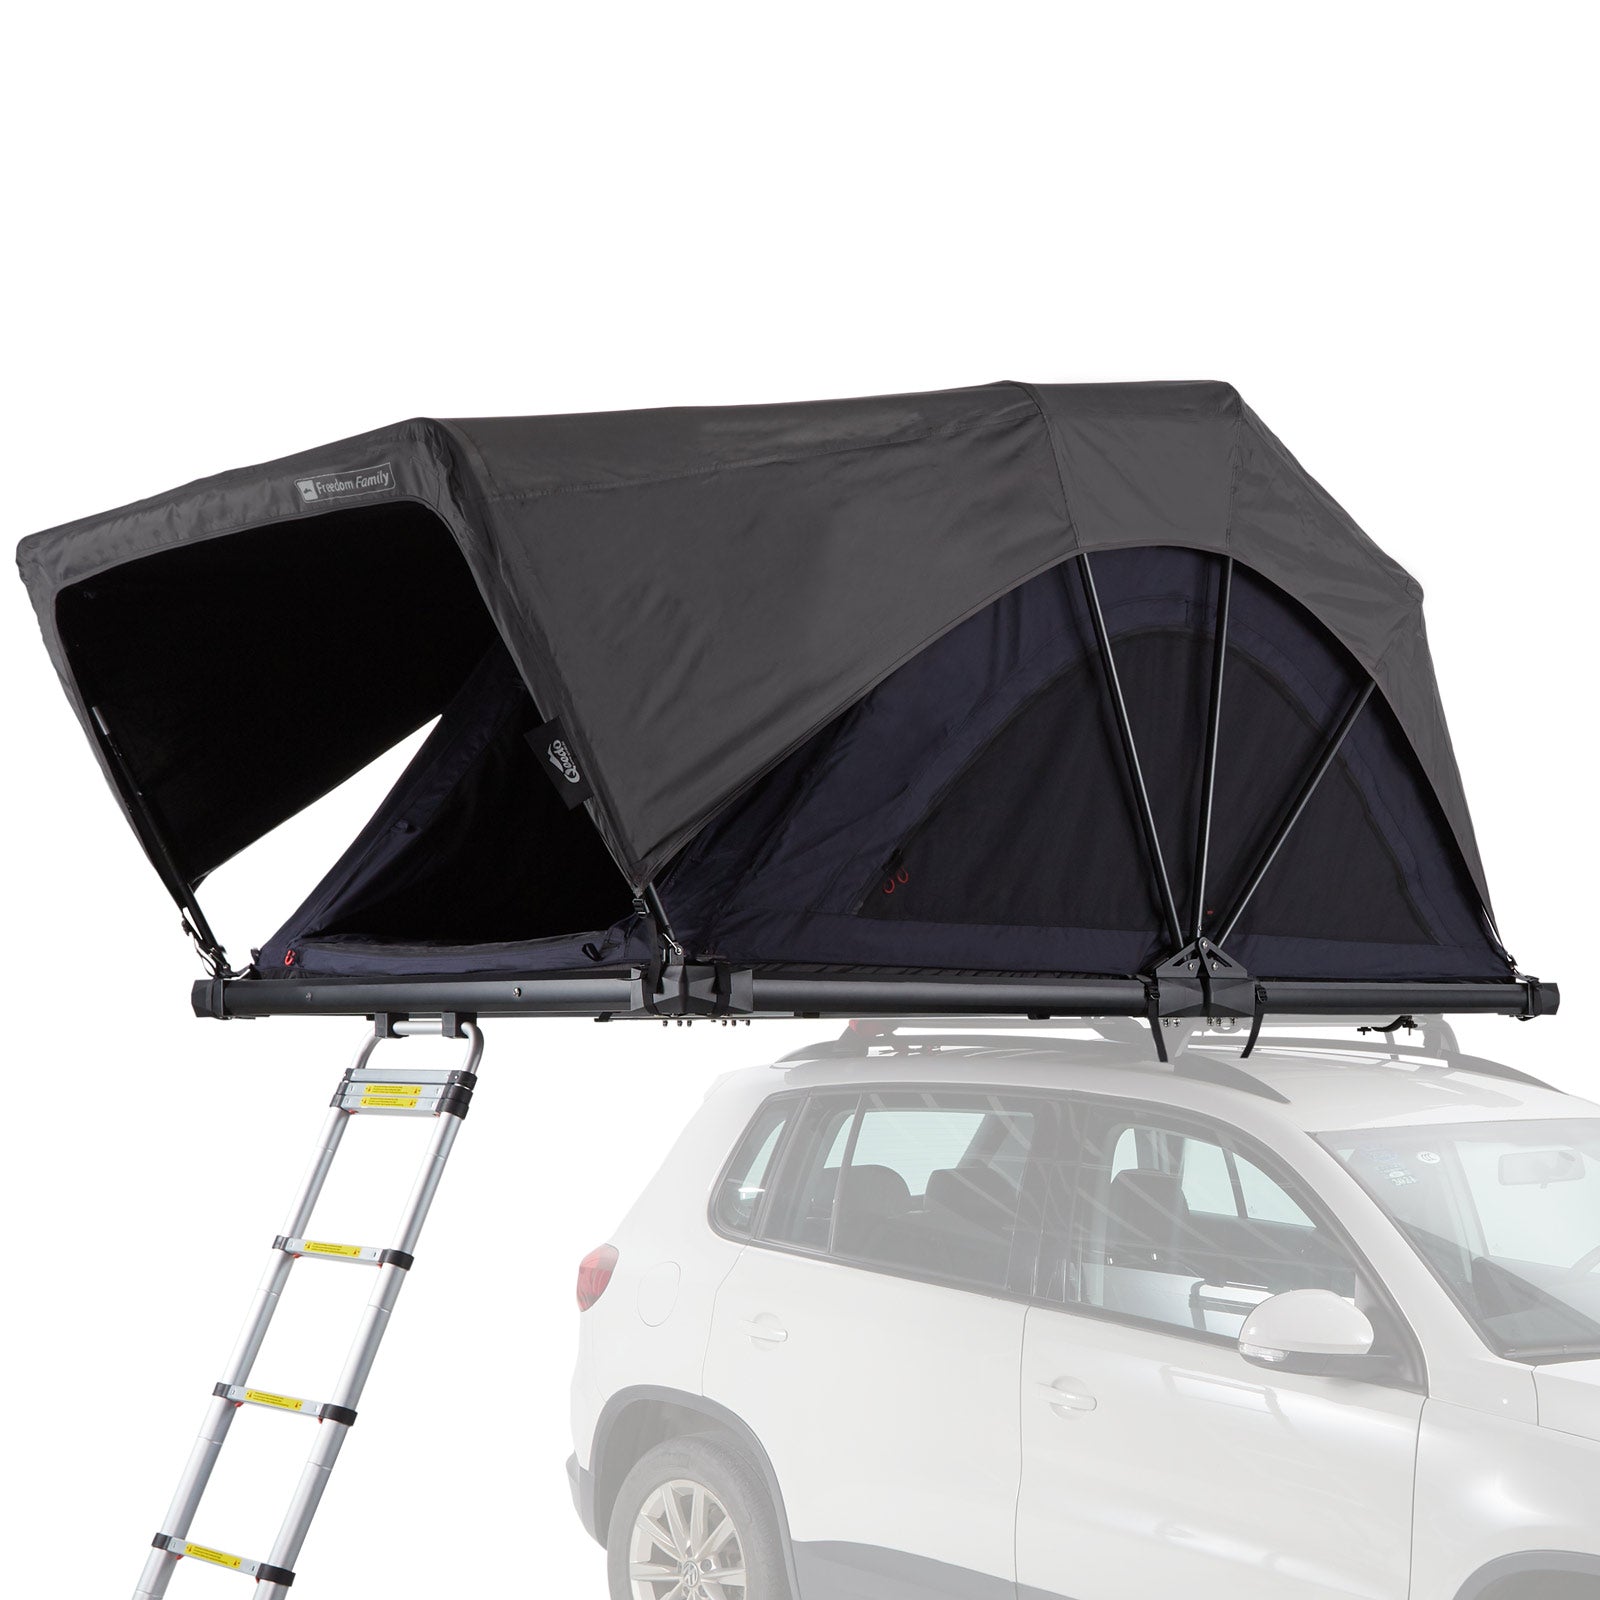 qeedo Freedom Family 4: The perfect roof tent for your family